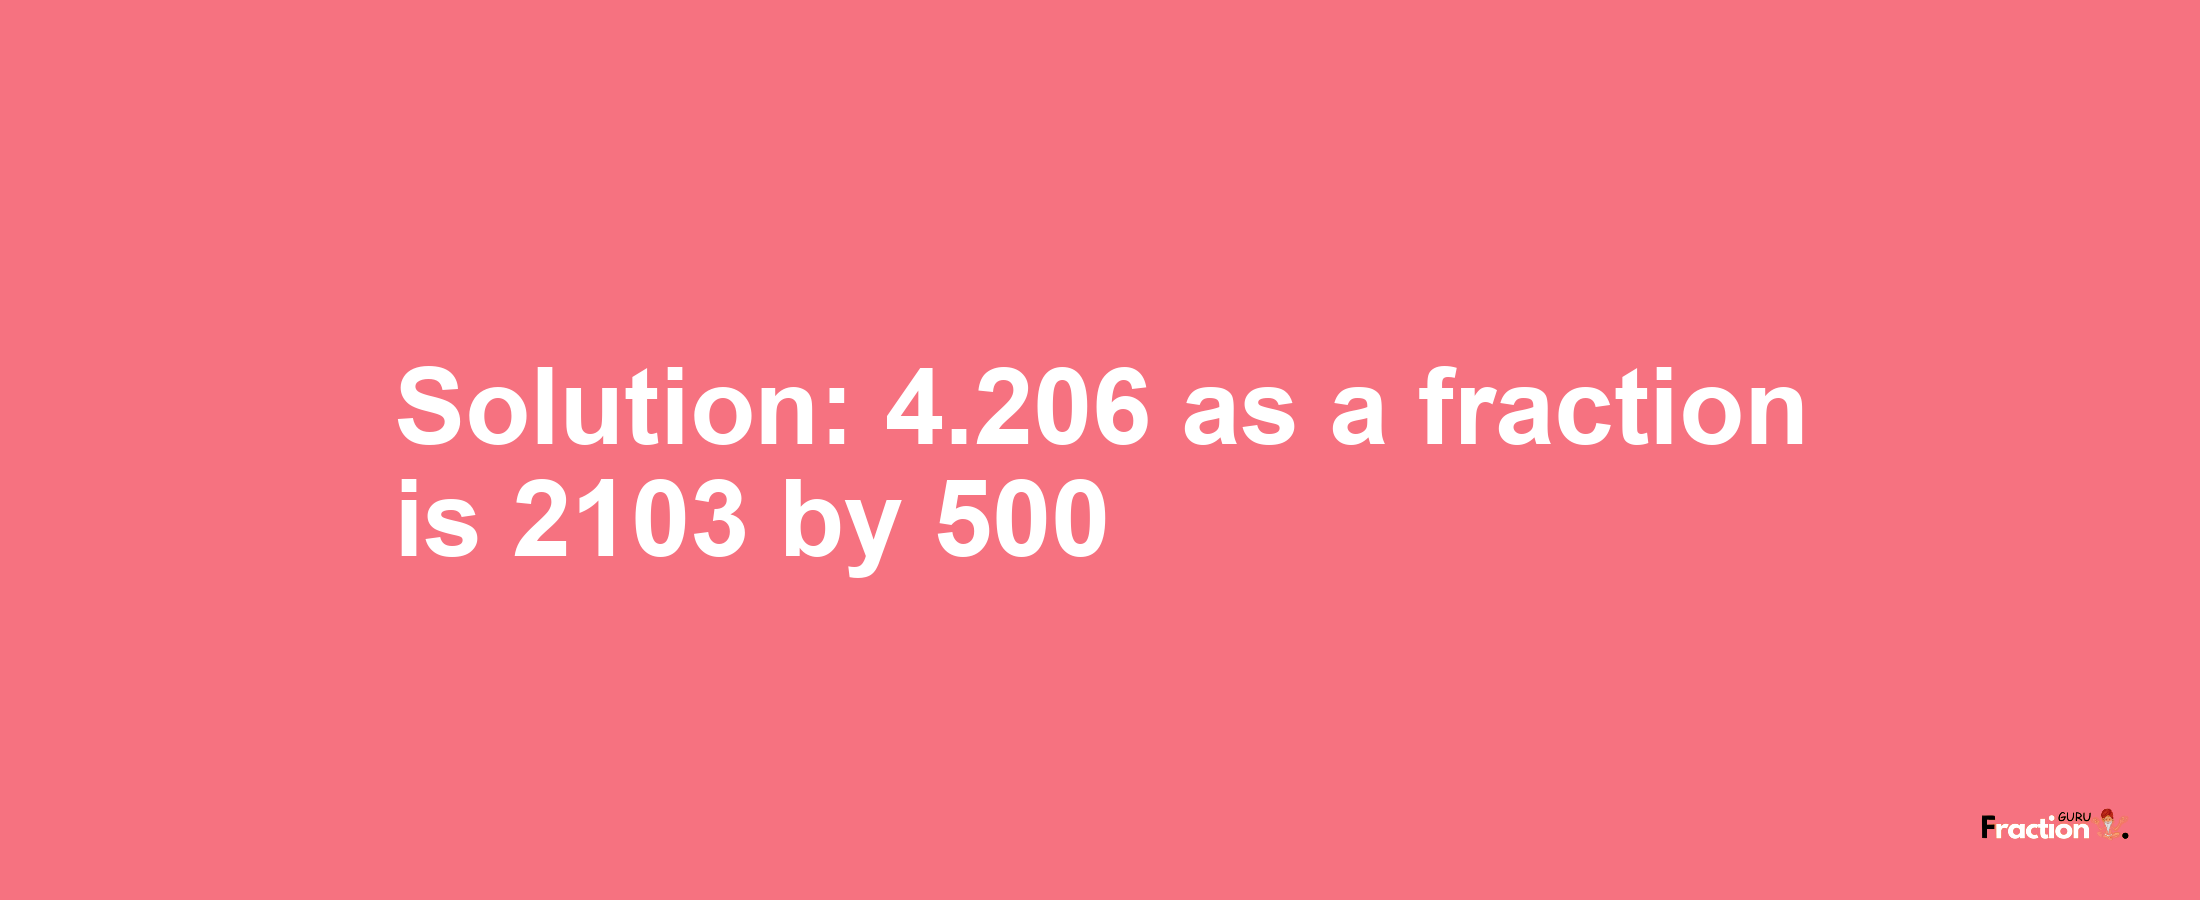 Solution:4.206 as a fraction is 2103/500